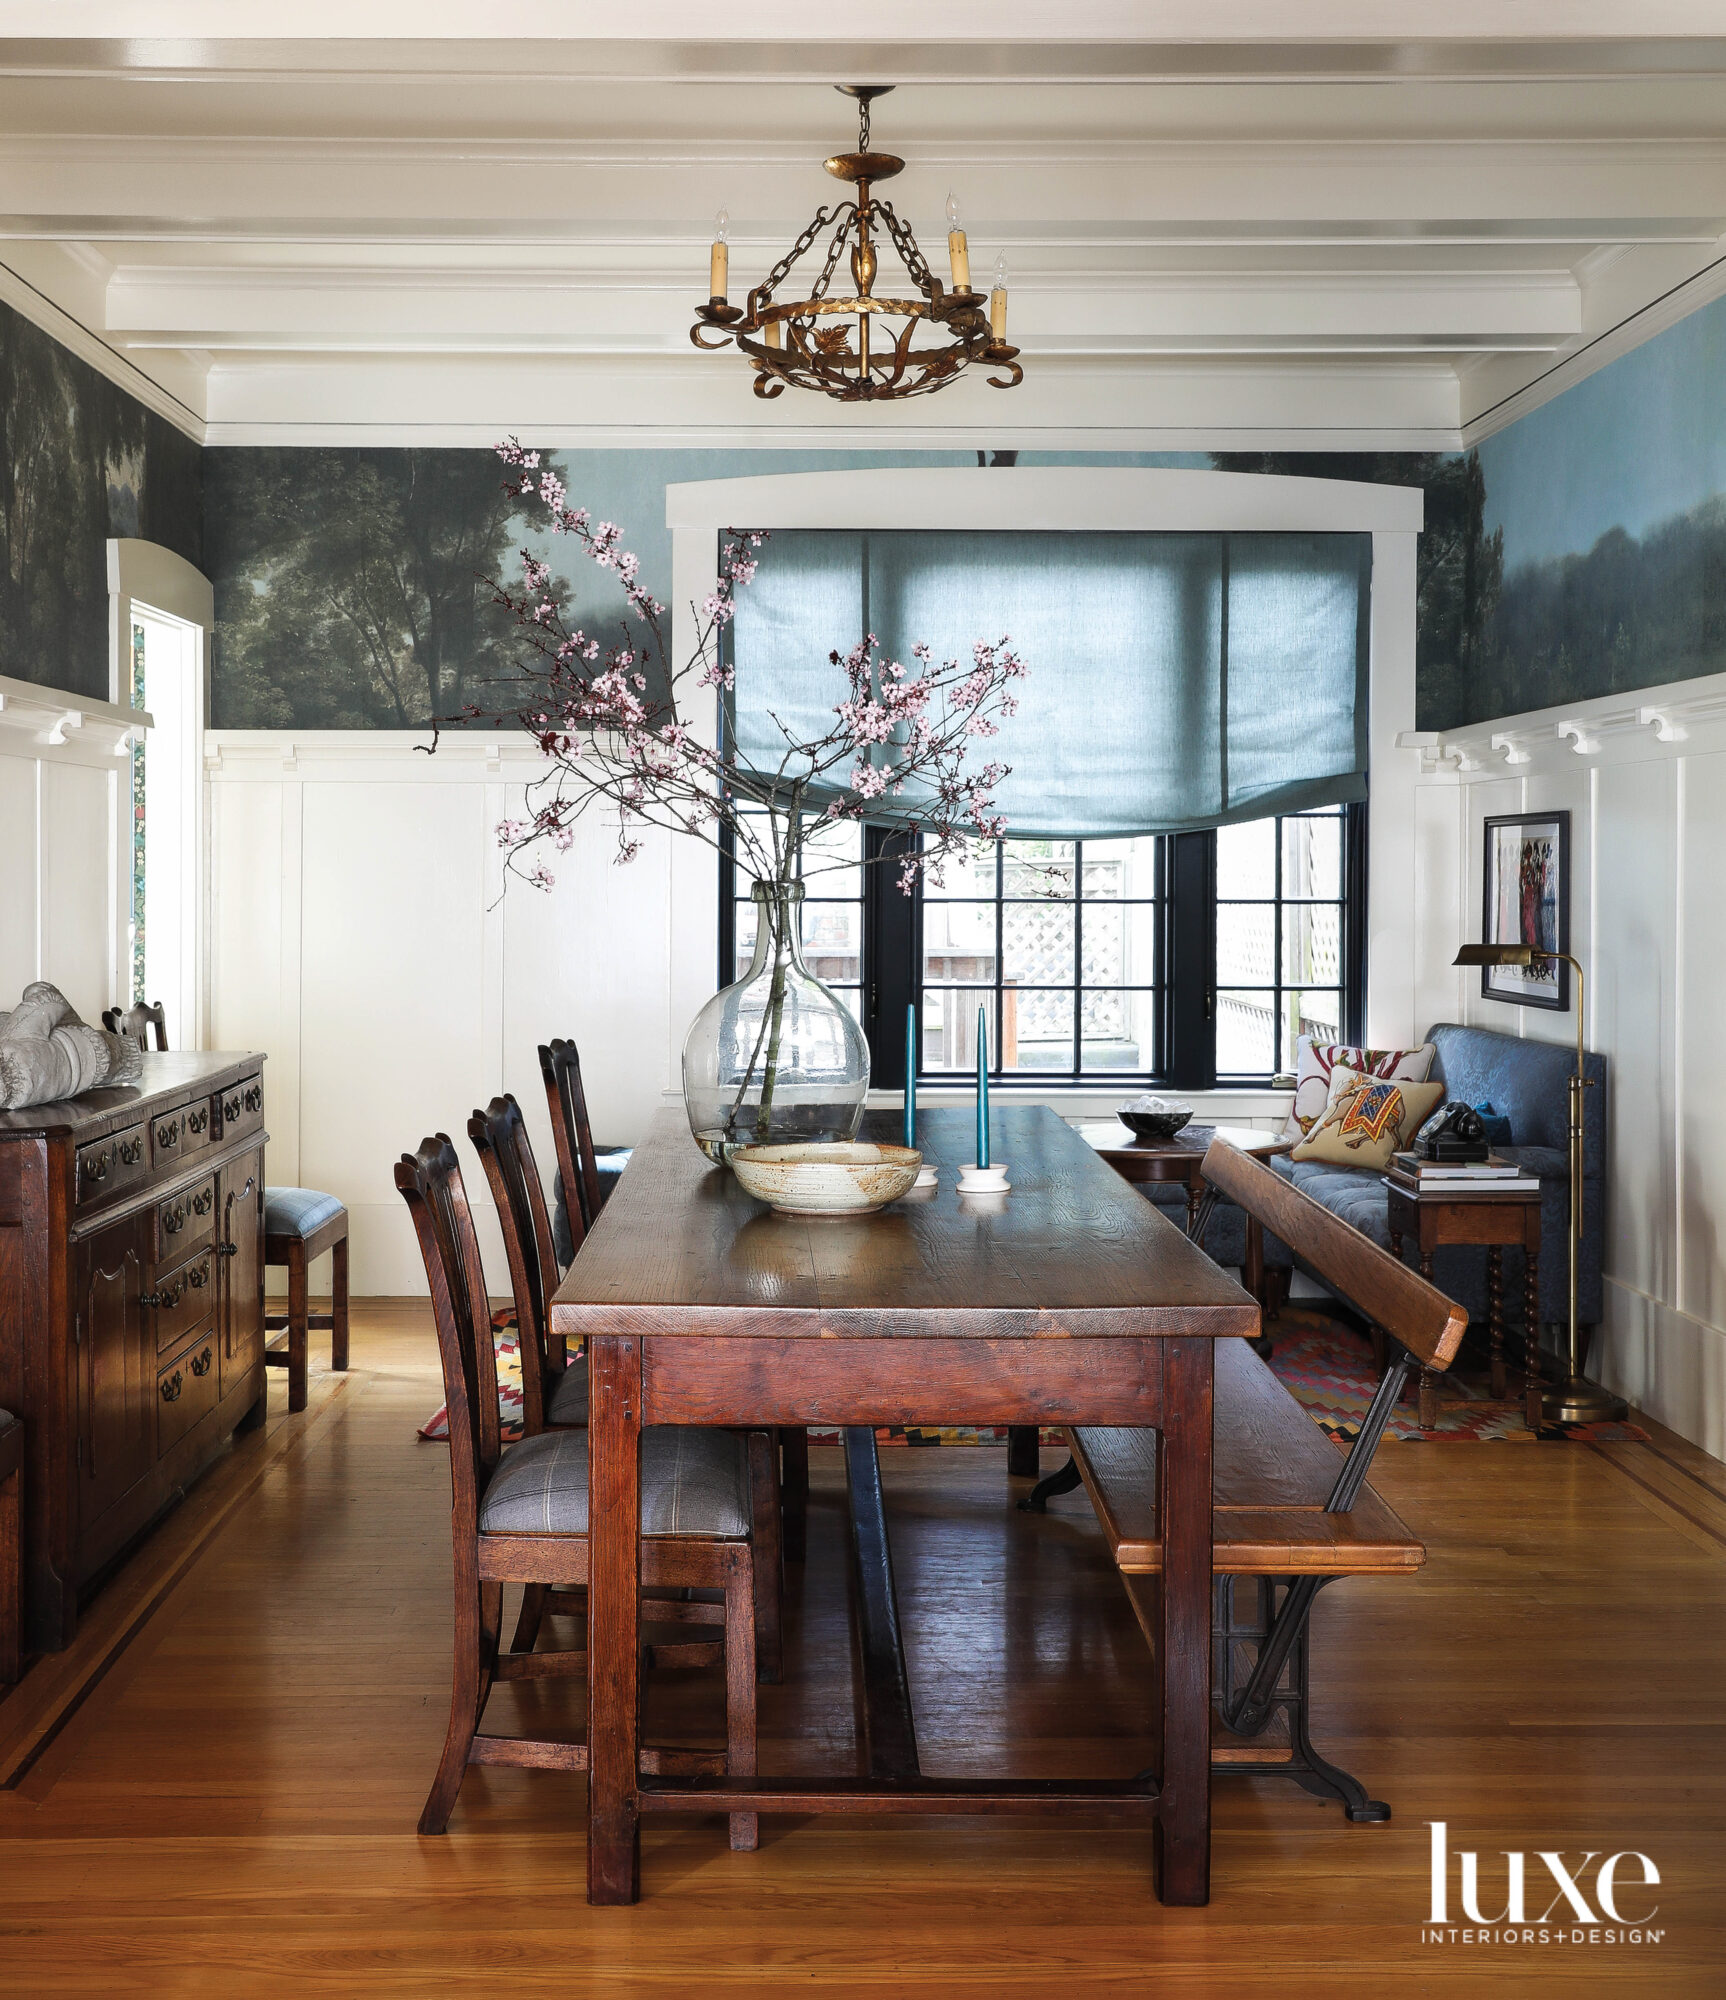 A dining room has a...